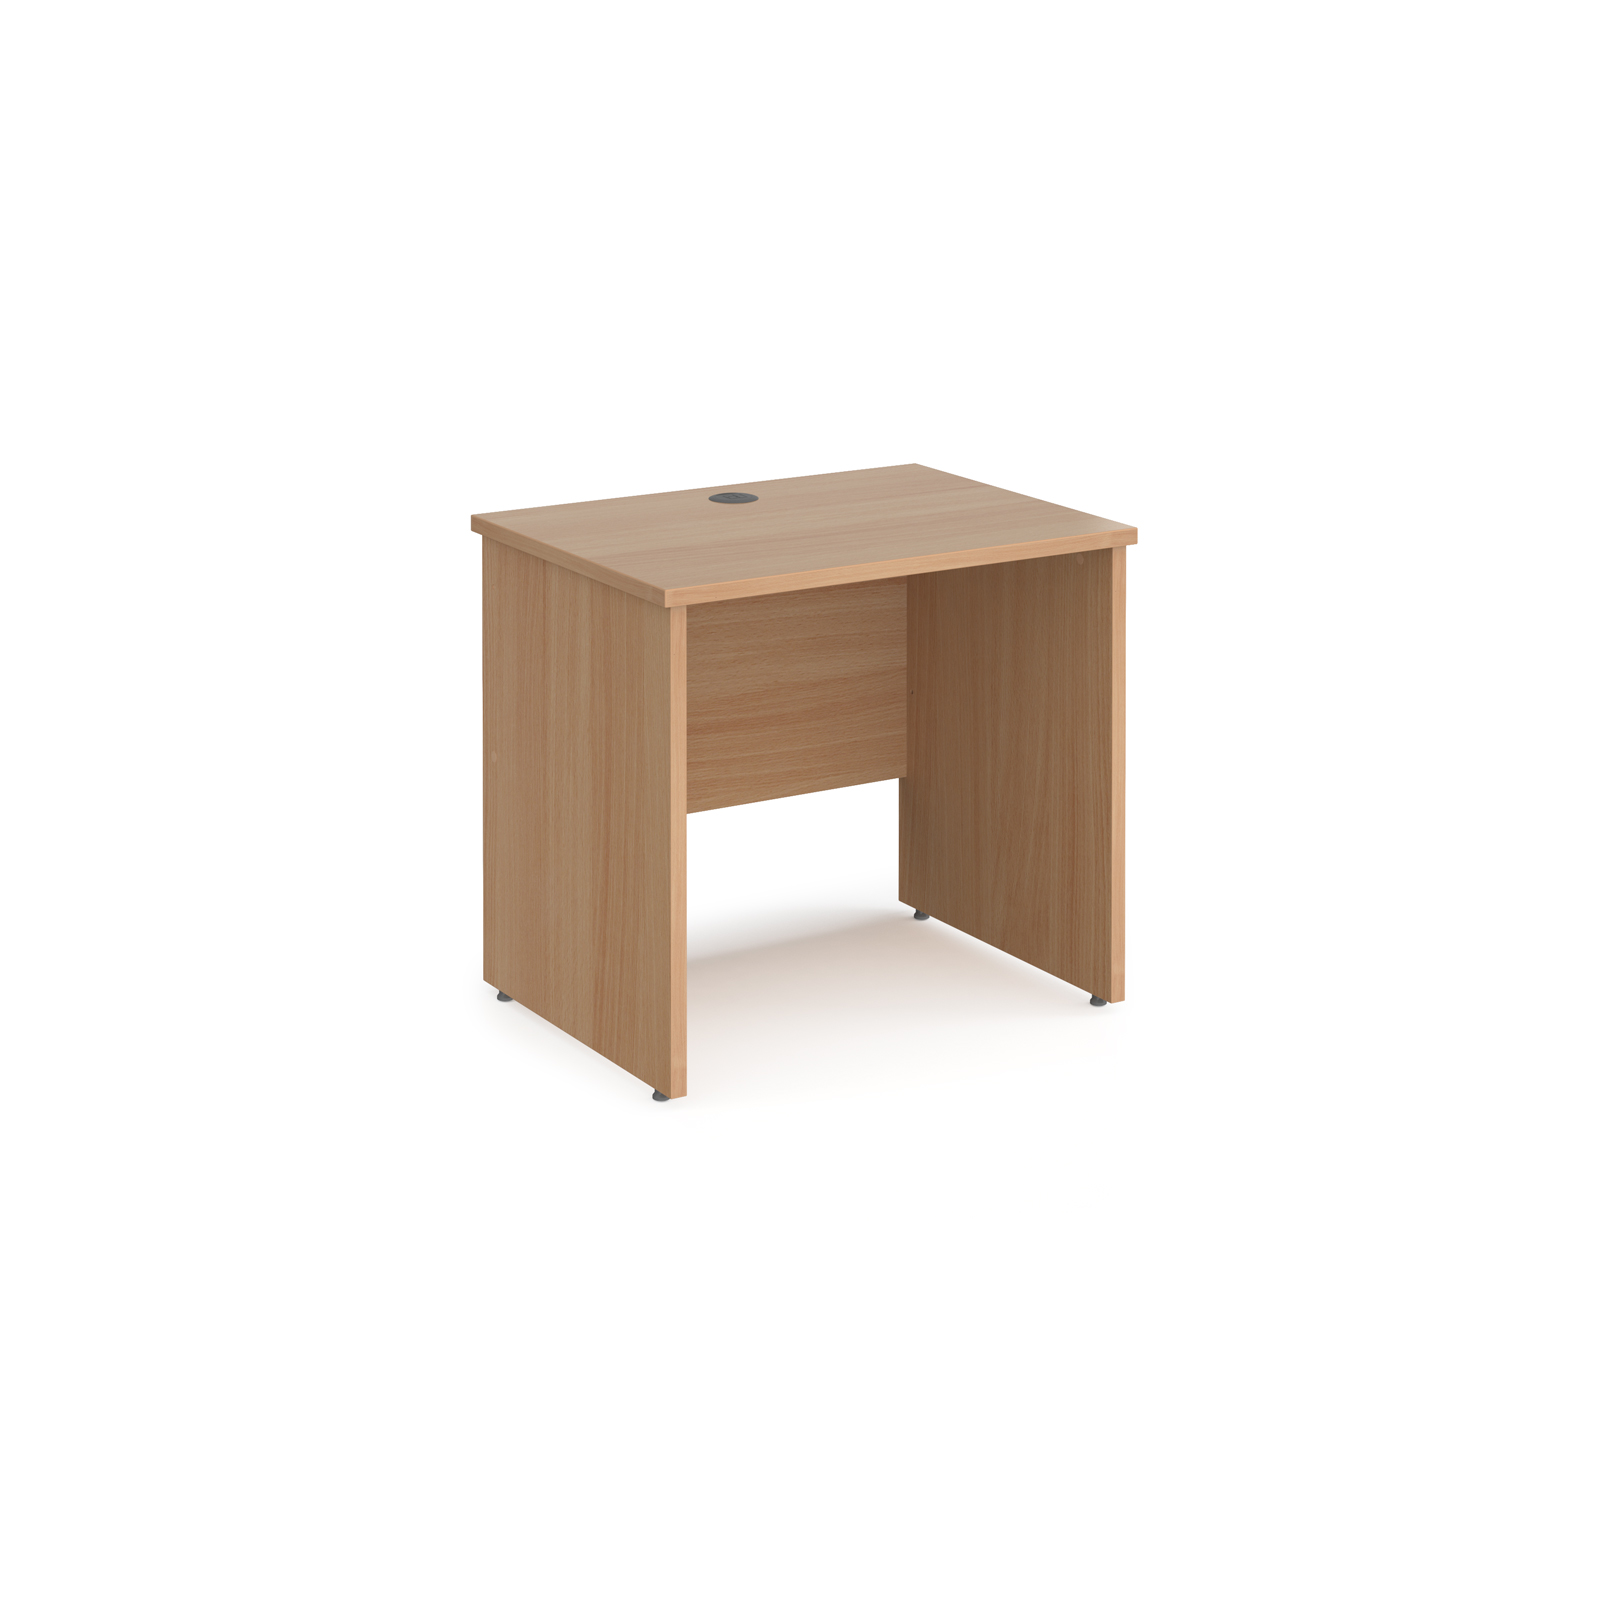 Maestro 25 straight desk 800mm x 600mm - beech top with panel end leg